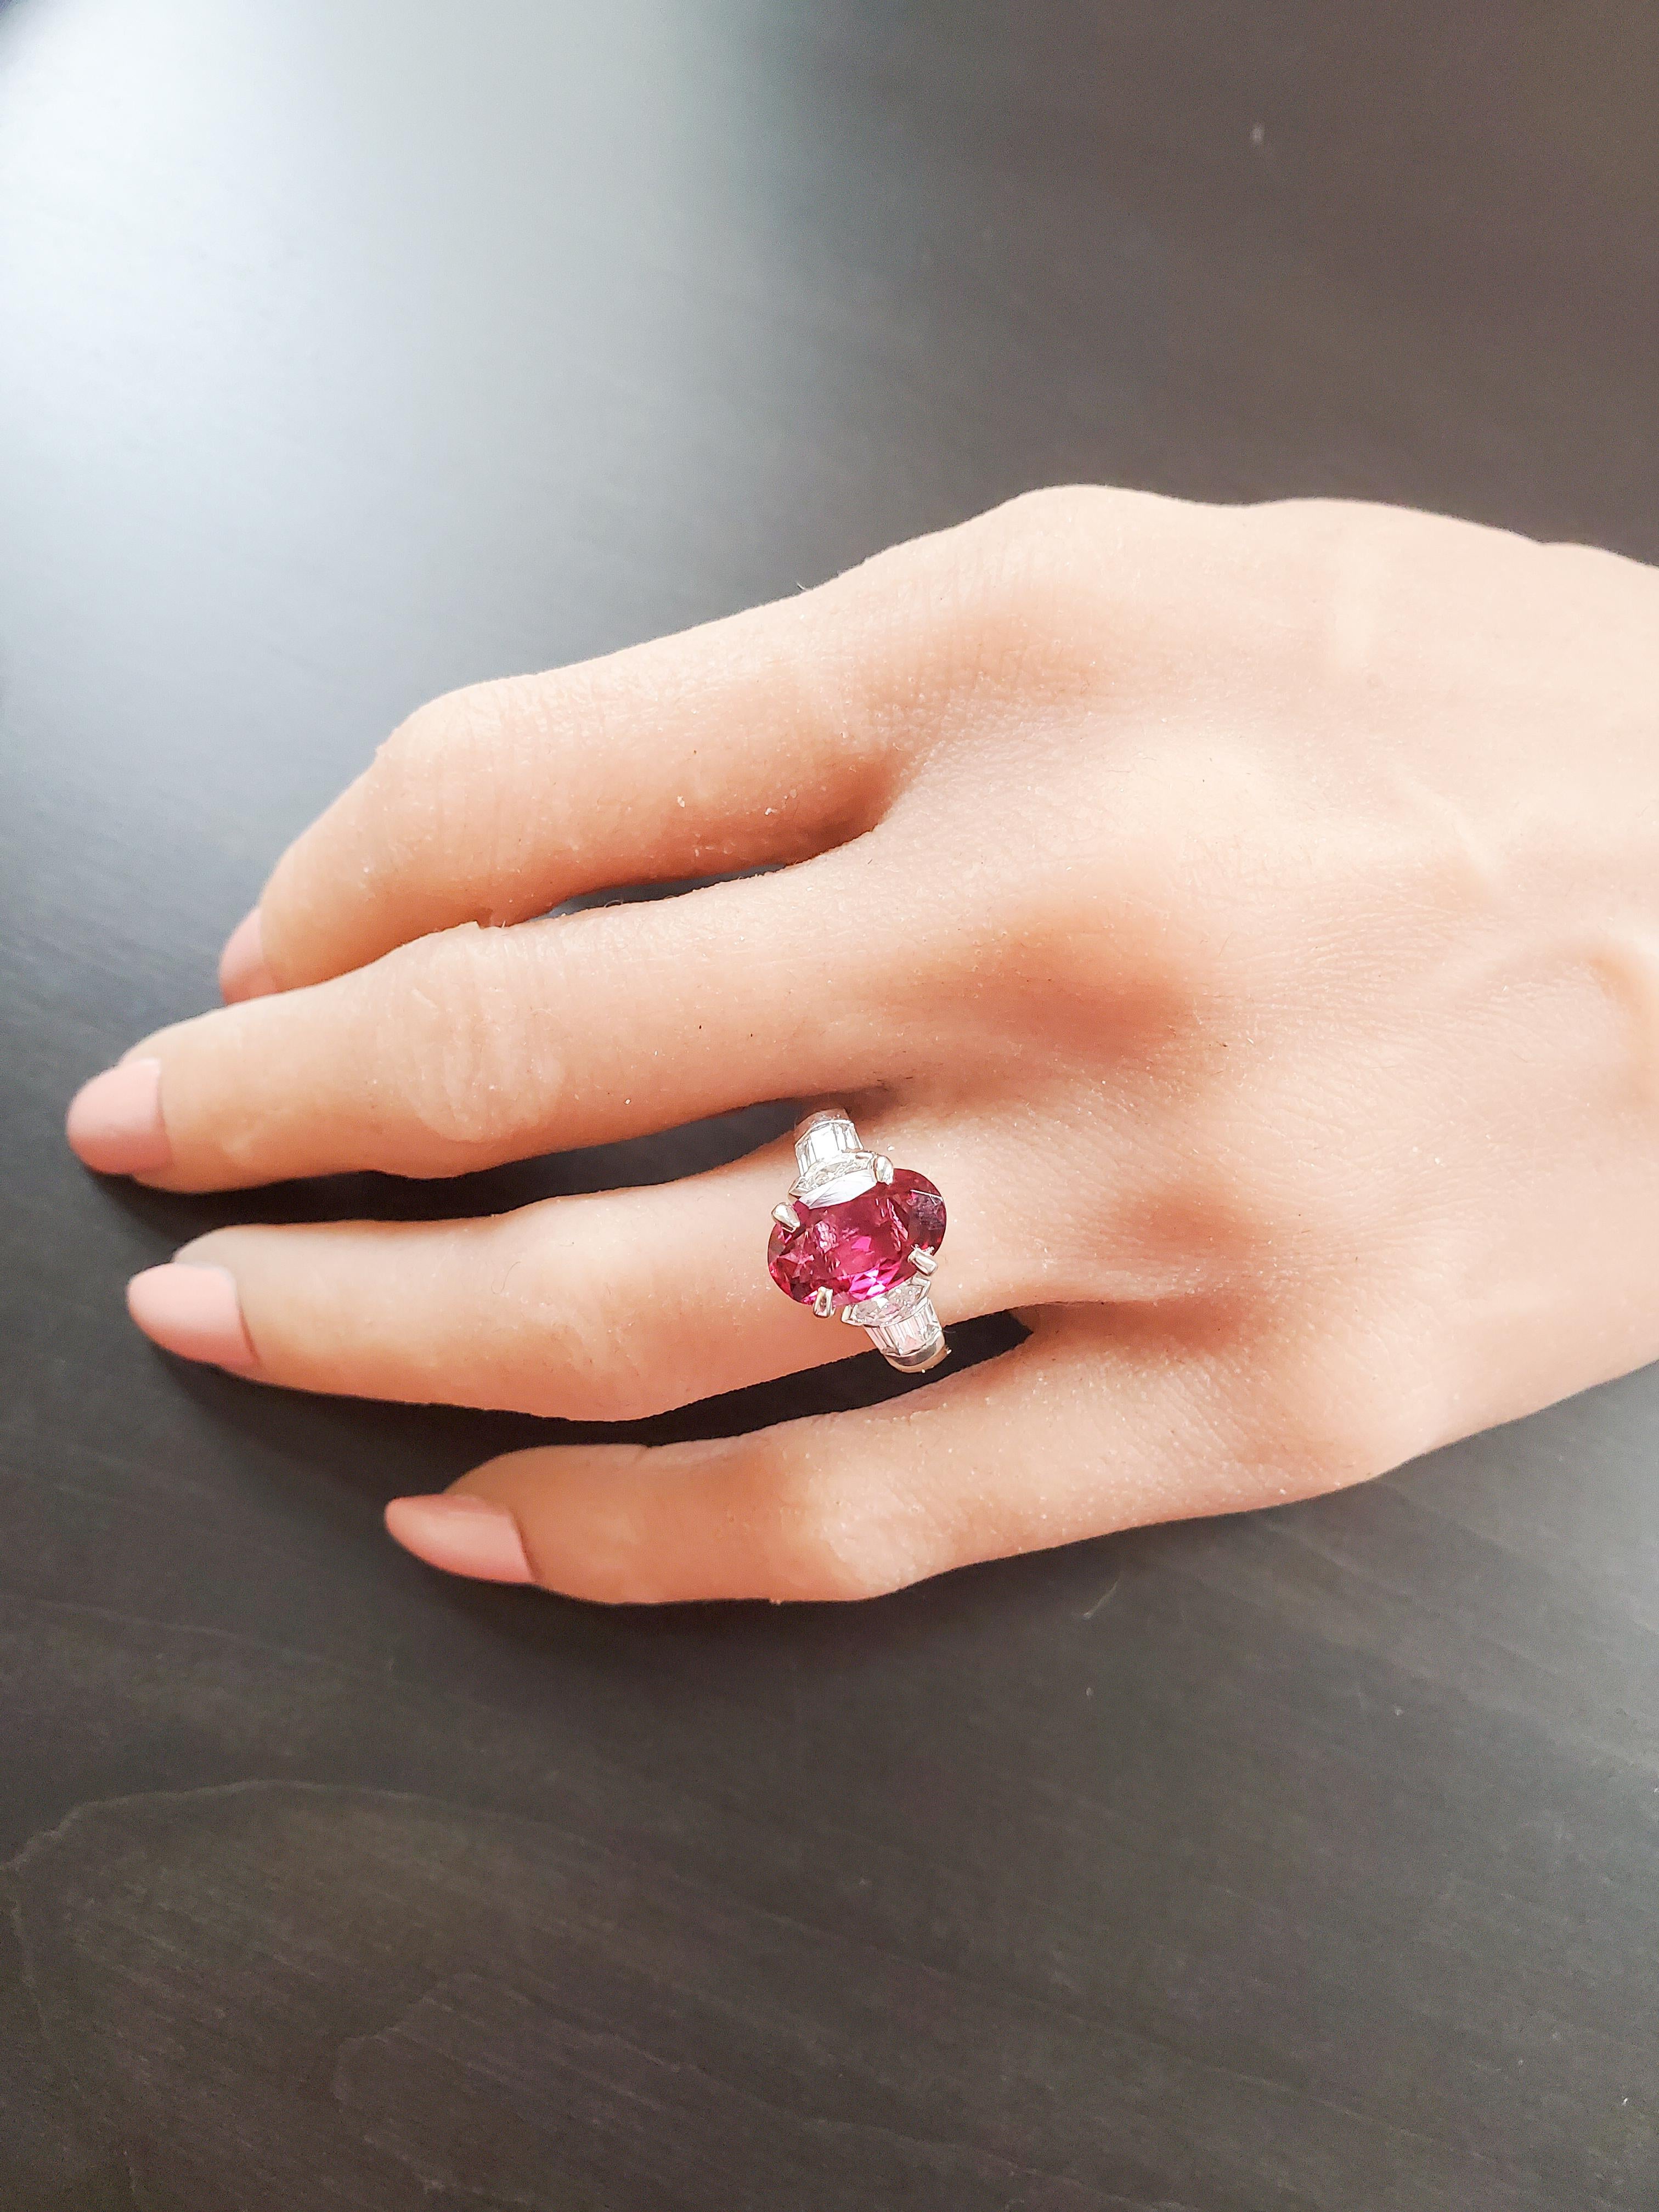 This art deco inspired ring features a natural 2.58 carat oval cut vibrant Brazilian rubellite prong set in the center. The gem source is Brazil; it's size, transparency, and luster are excellent. This alluring rubellite is complemented by 2